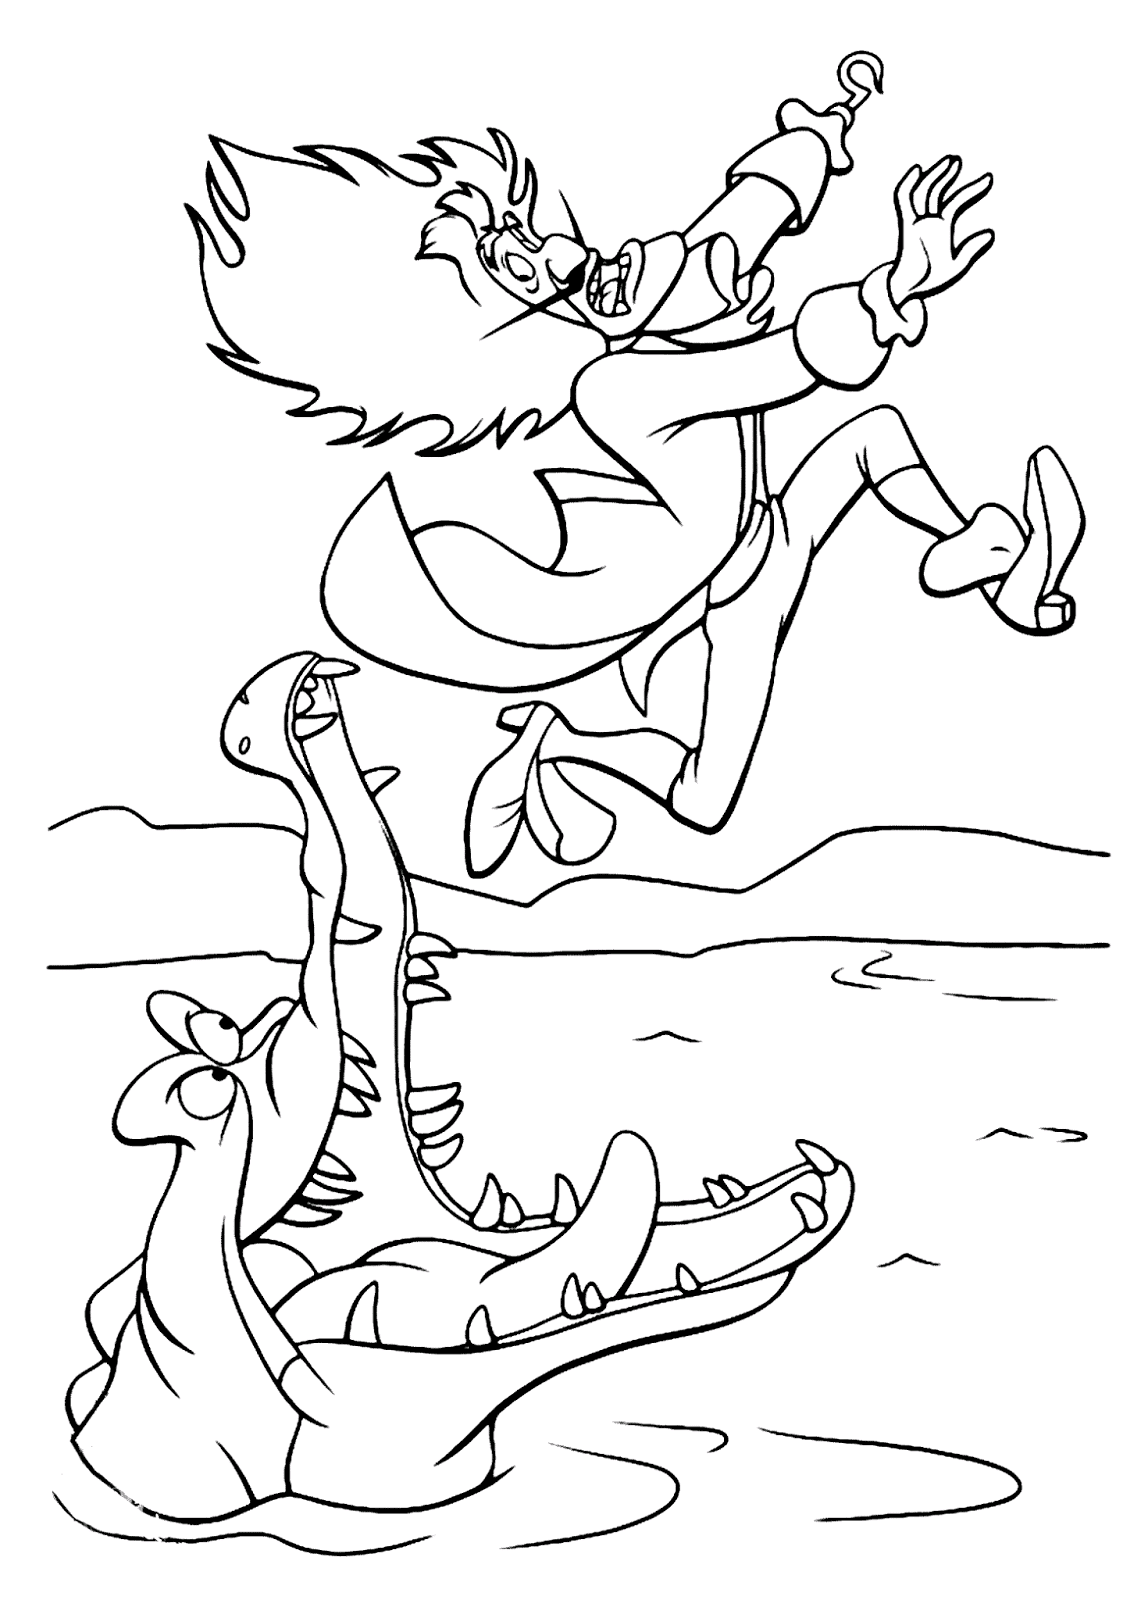 Funny Alligator And Captain Hook Coloring Page